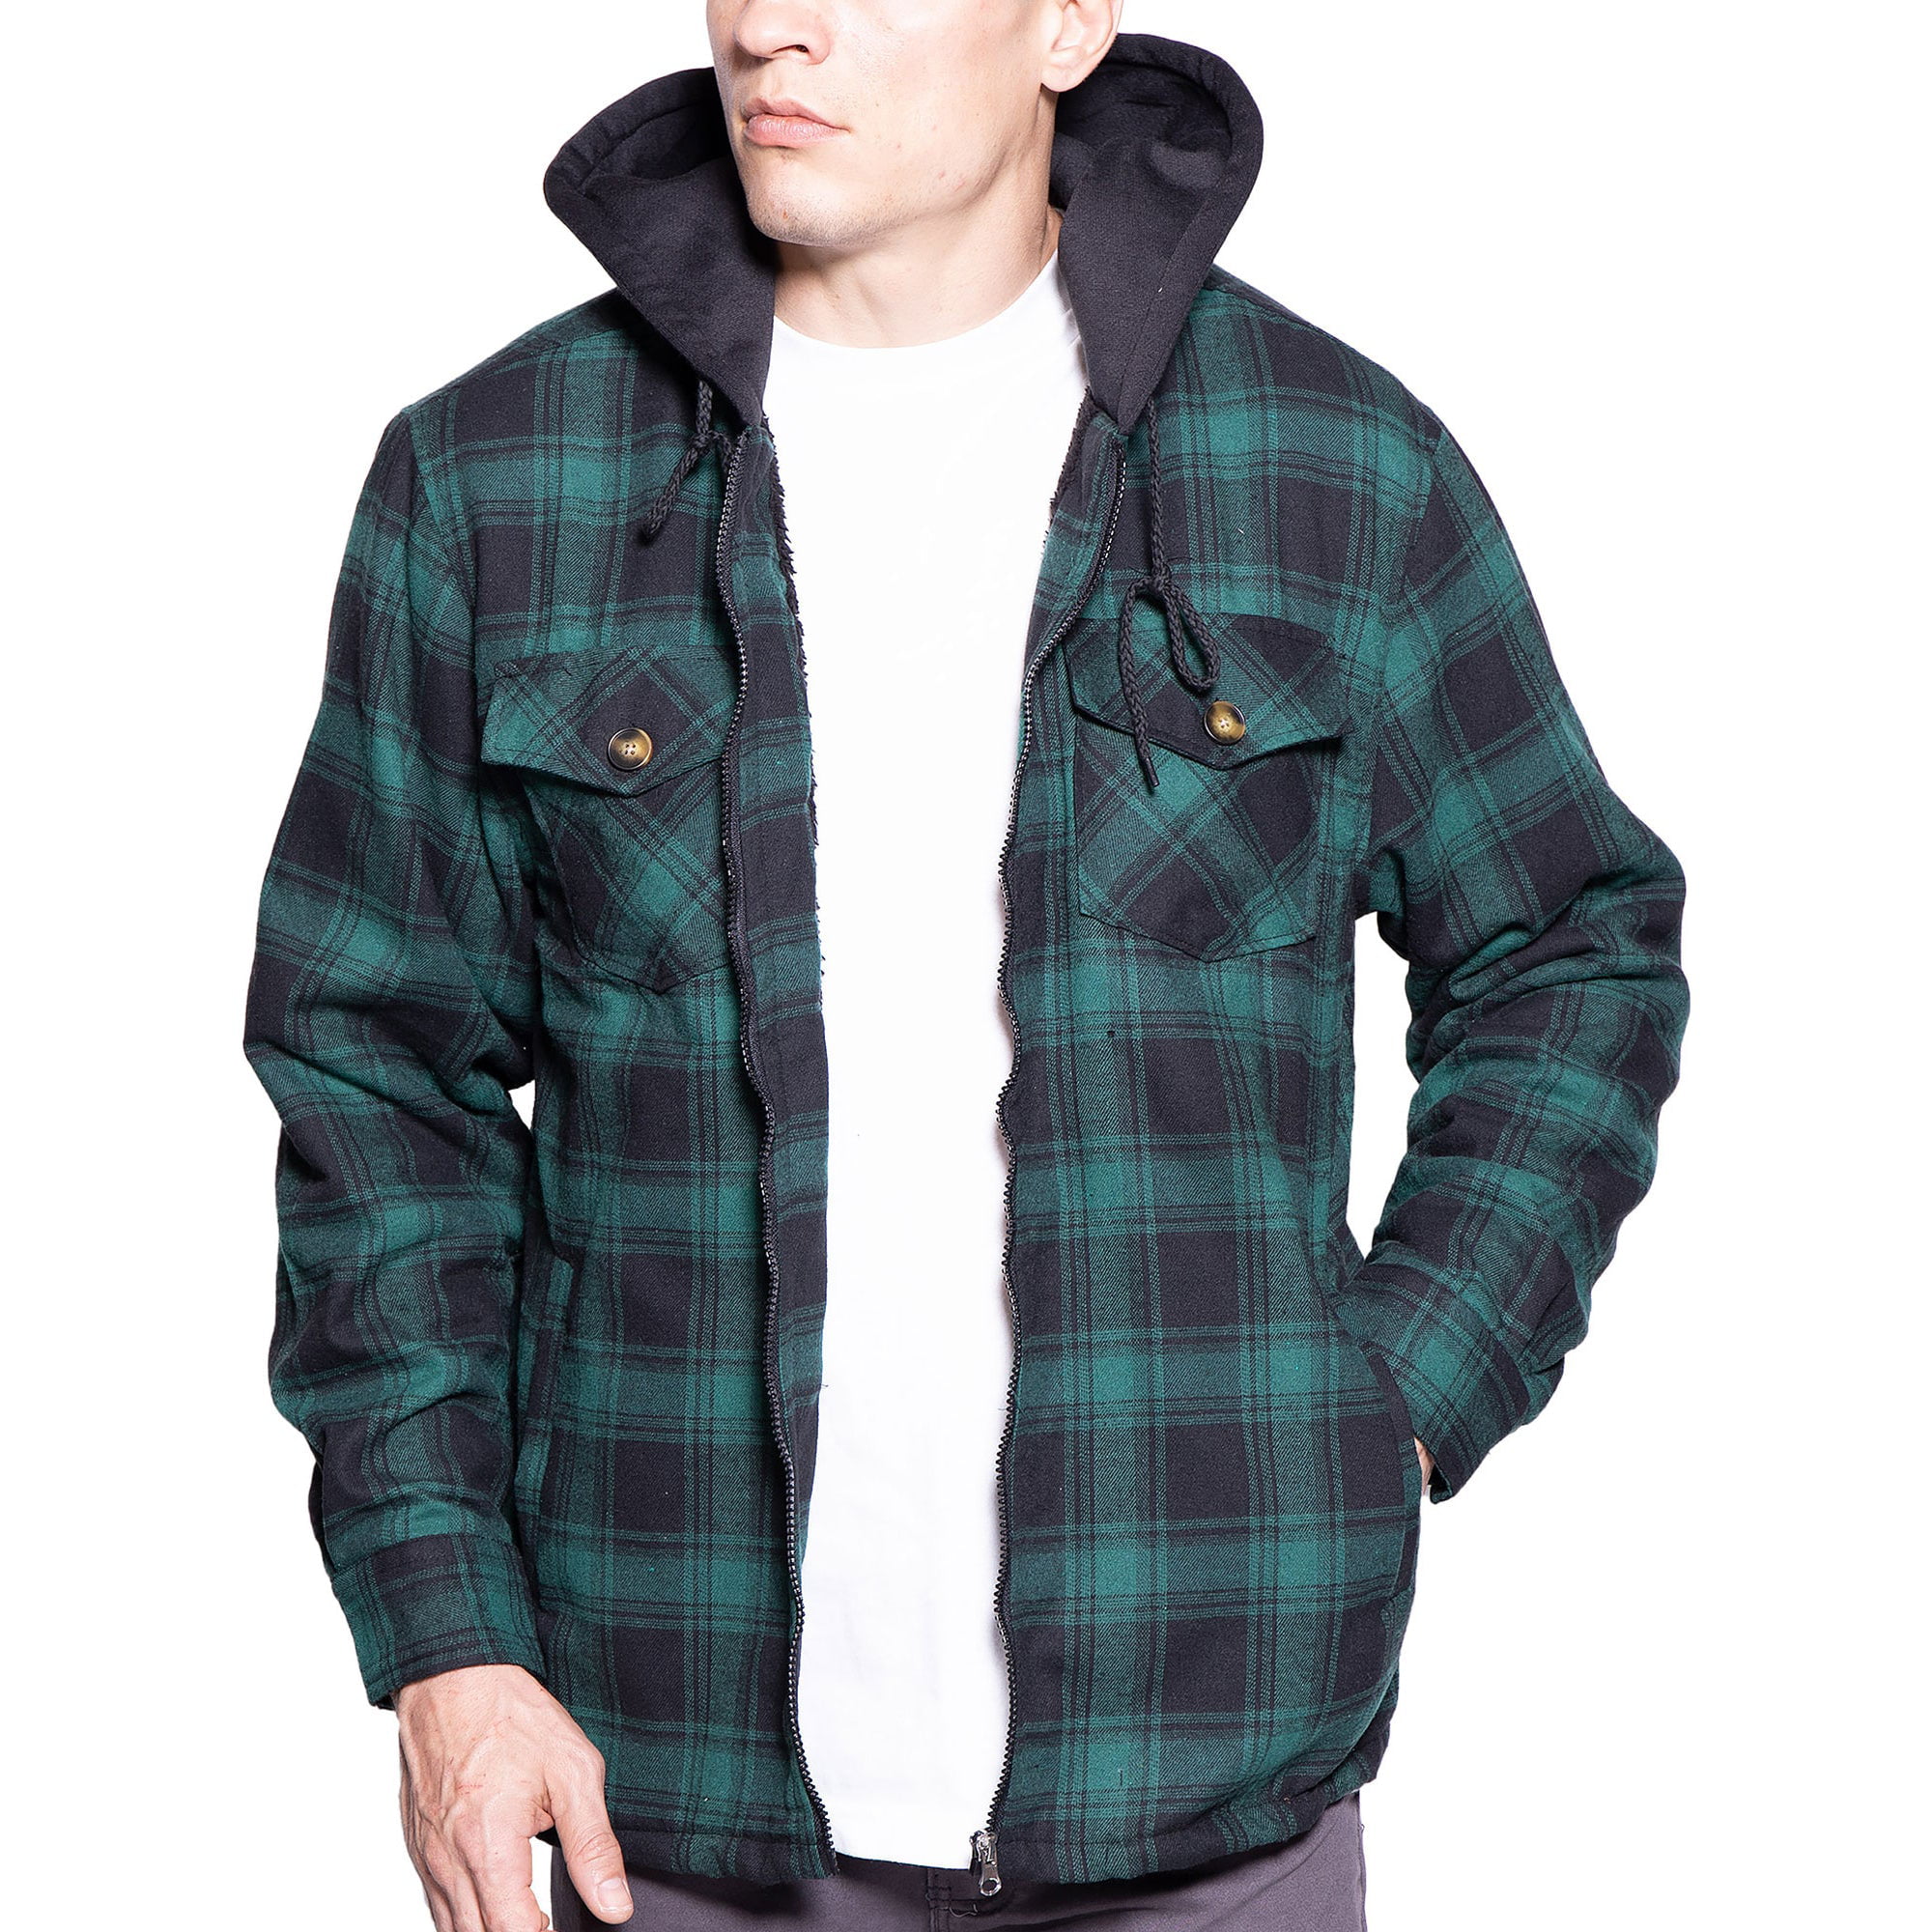 Visive Flannel Shirt Jacket For Men and Big Mens Sherpa Lined Zip Up ...